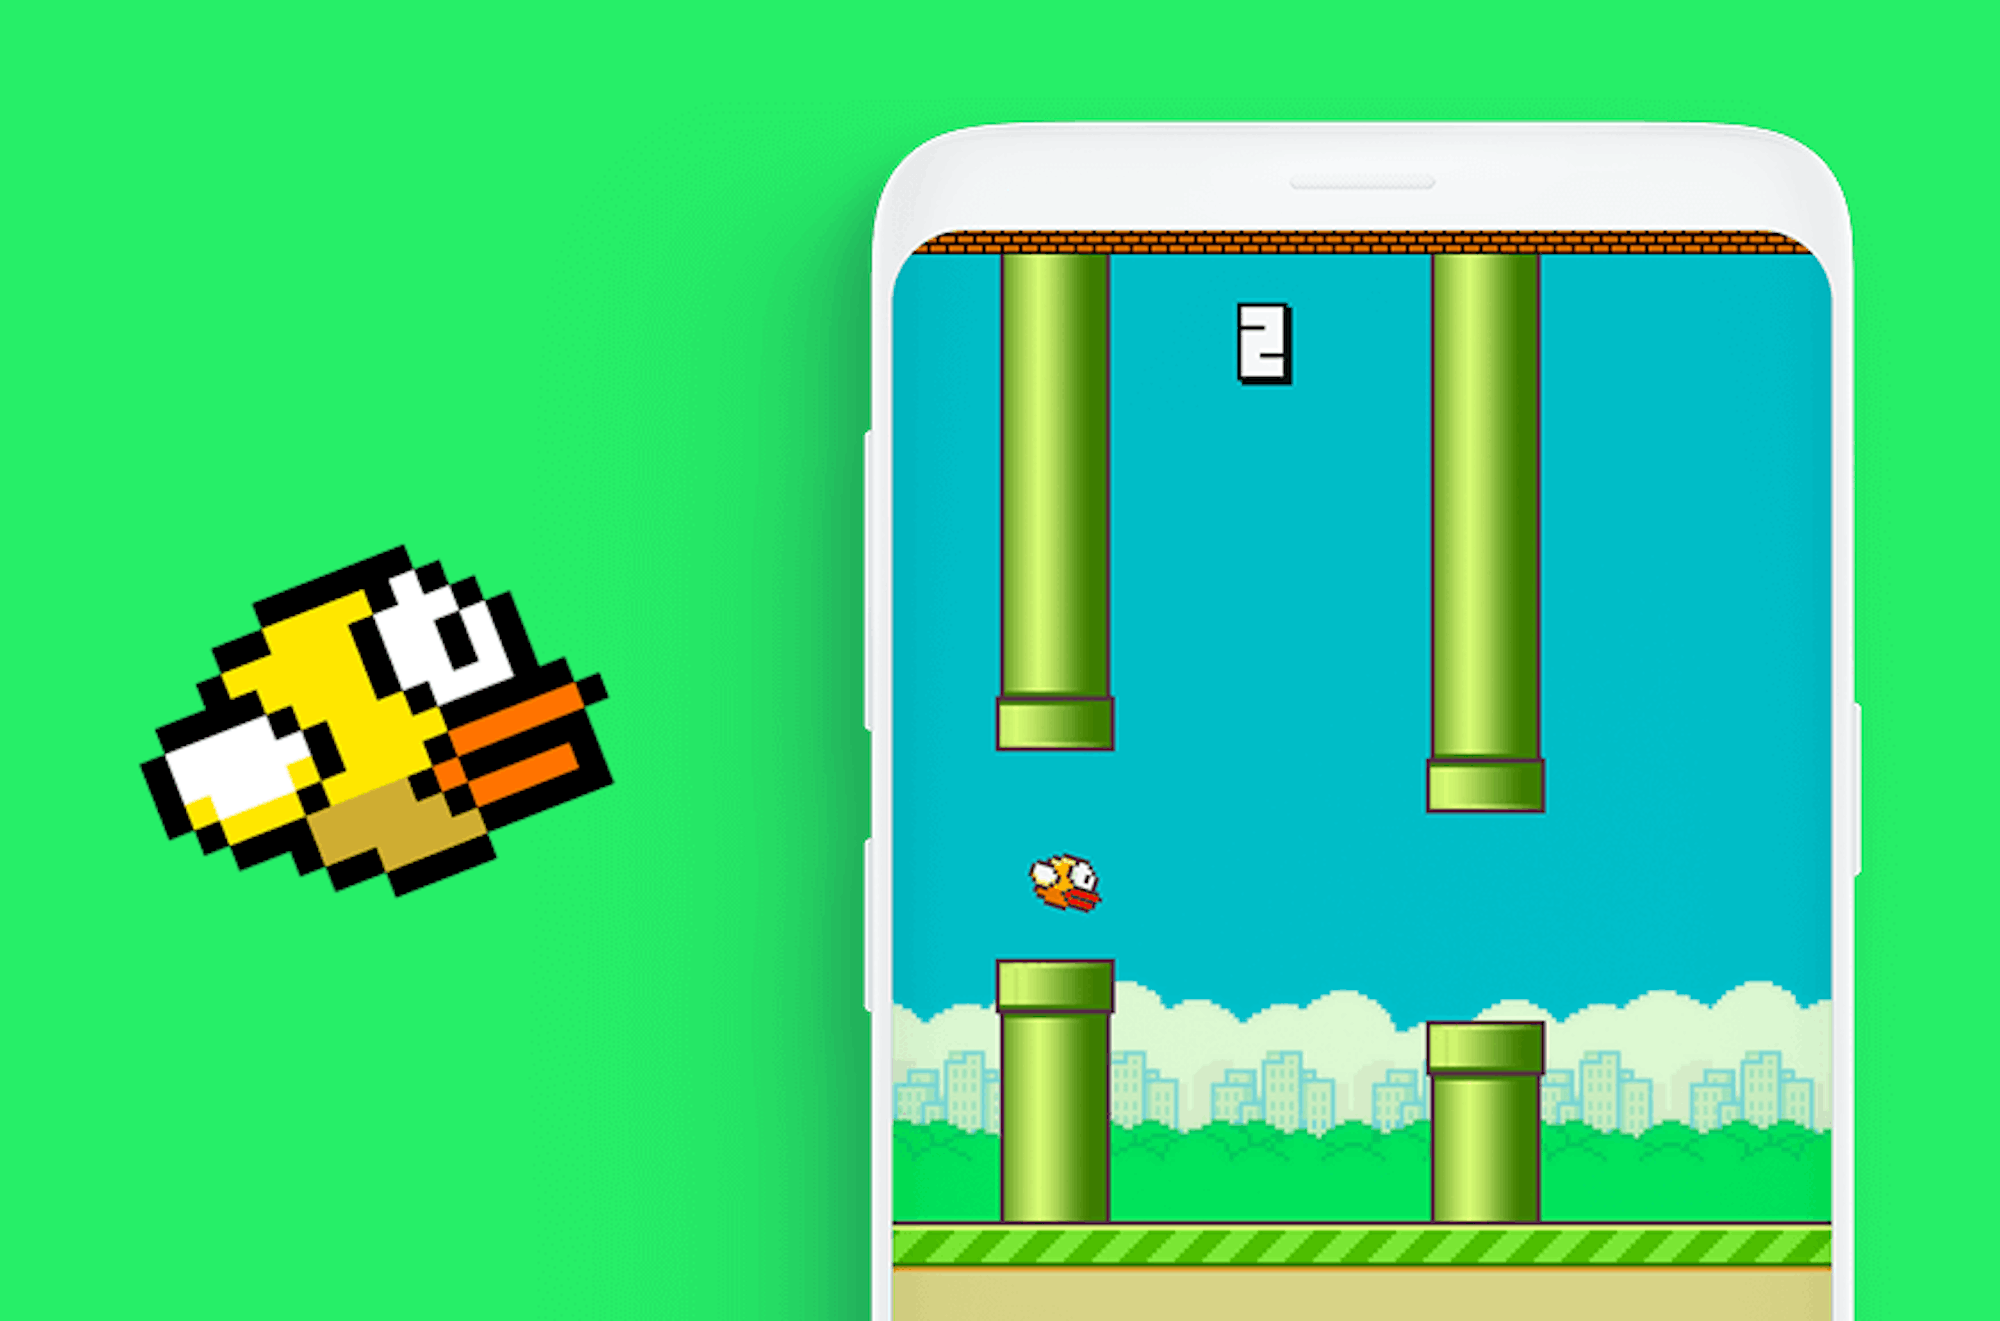 The popular mobile game flappy bird, was recreated in a PWA to show that you dont need to install games anymore.